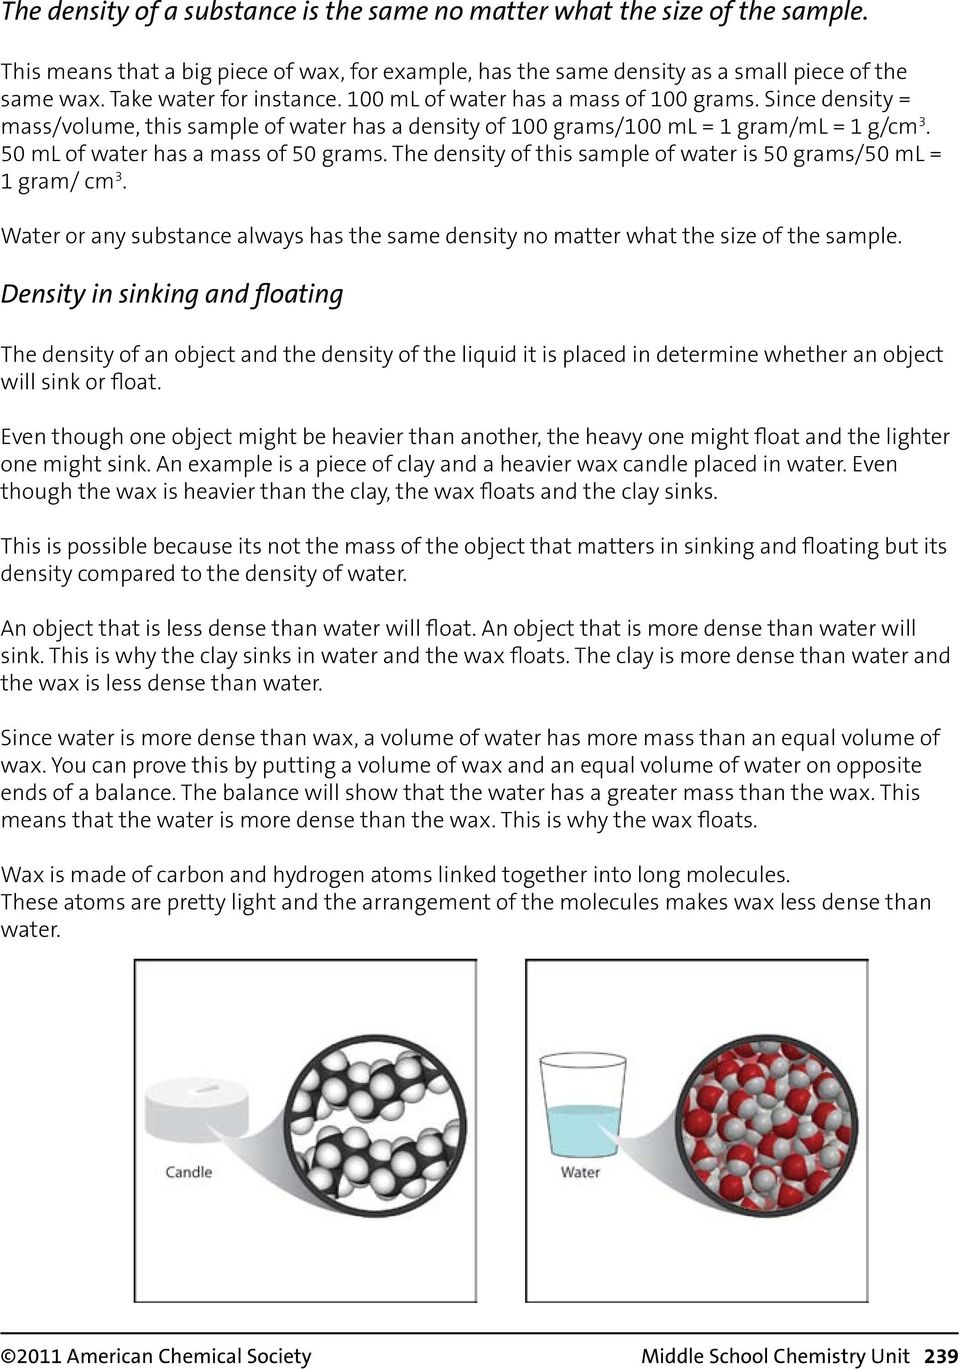 50 ml of water has a mass of 50 grams. The density of this sample of water is 50 grams/50 ml = 1 gram/ cm 3. Water or any substance always has the same density no matter what the size of the sample.